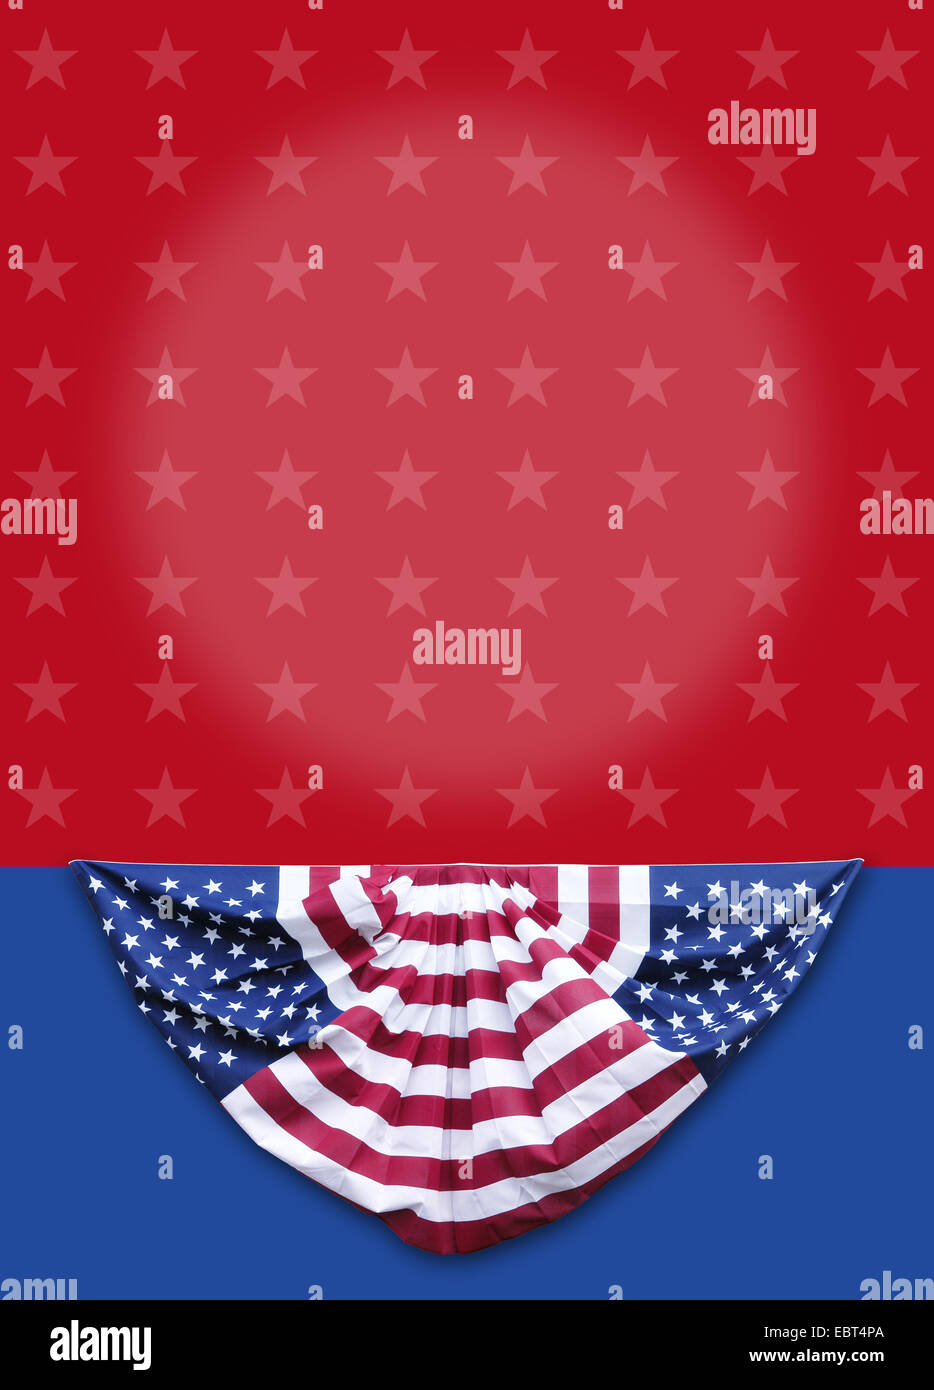 Election Poster Background: Red, white and blue election/campaign poster or background with patriotic bunting decorations. Stock Photo